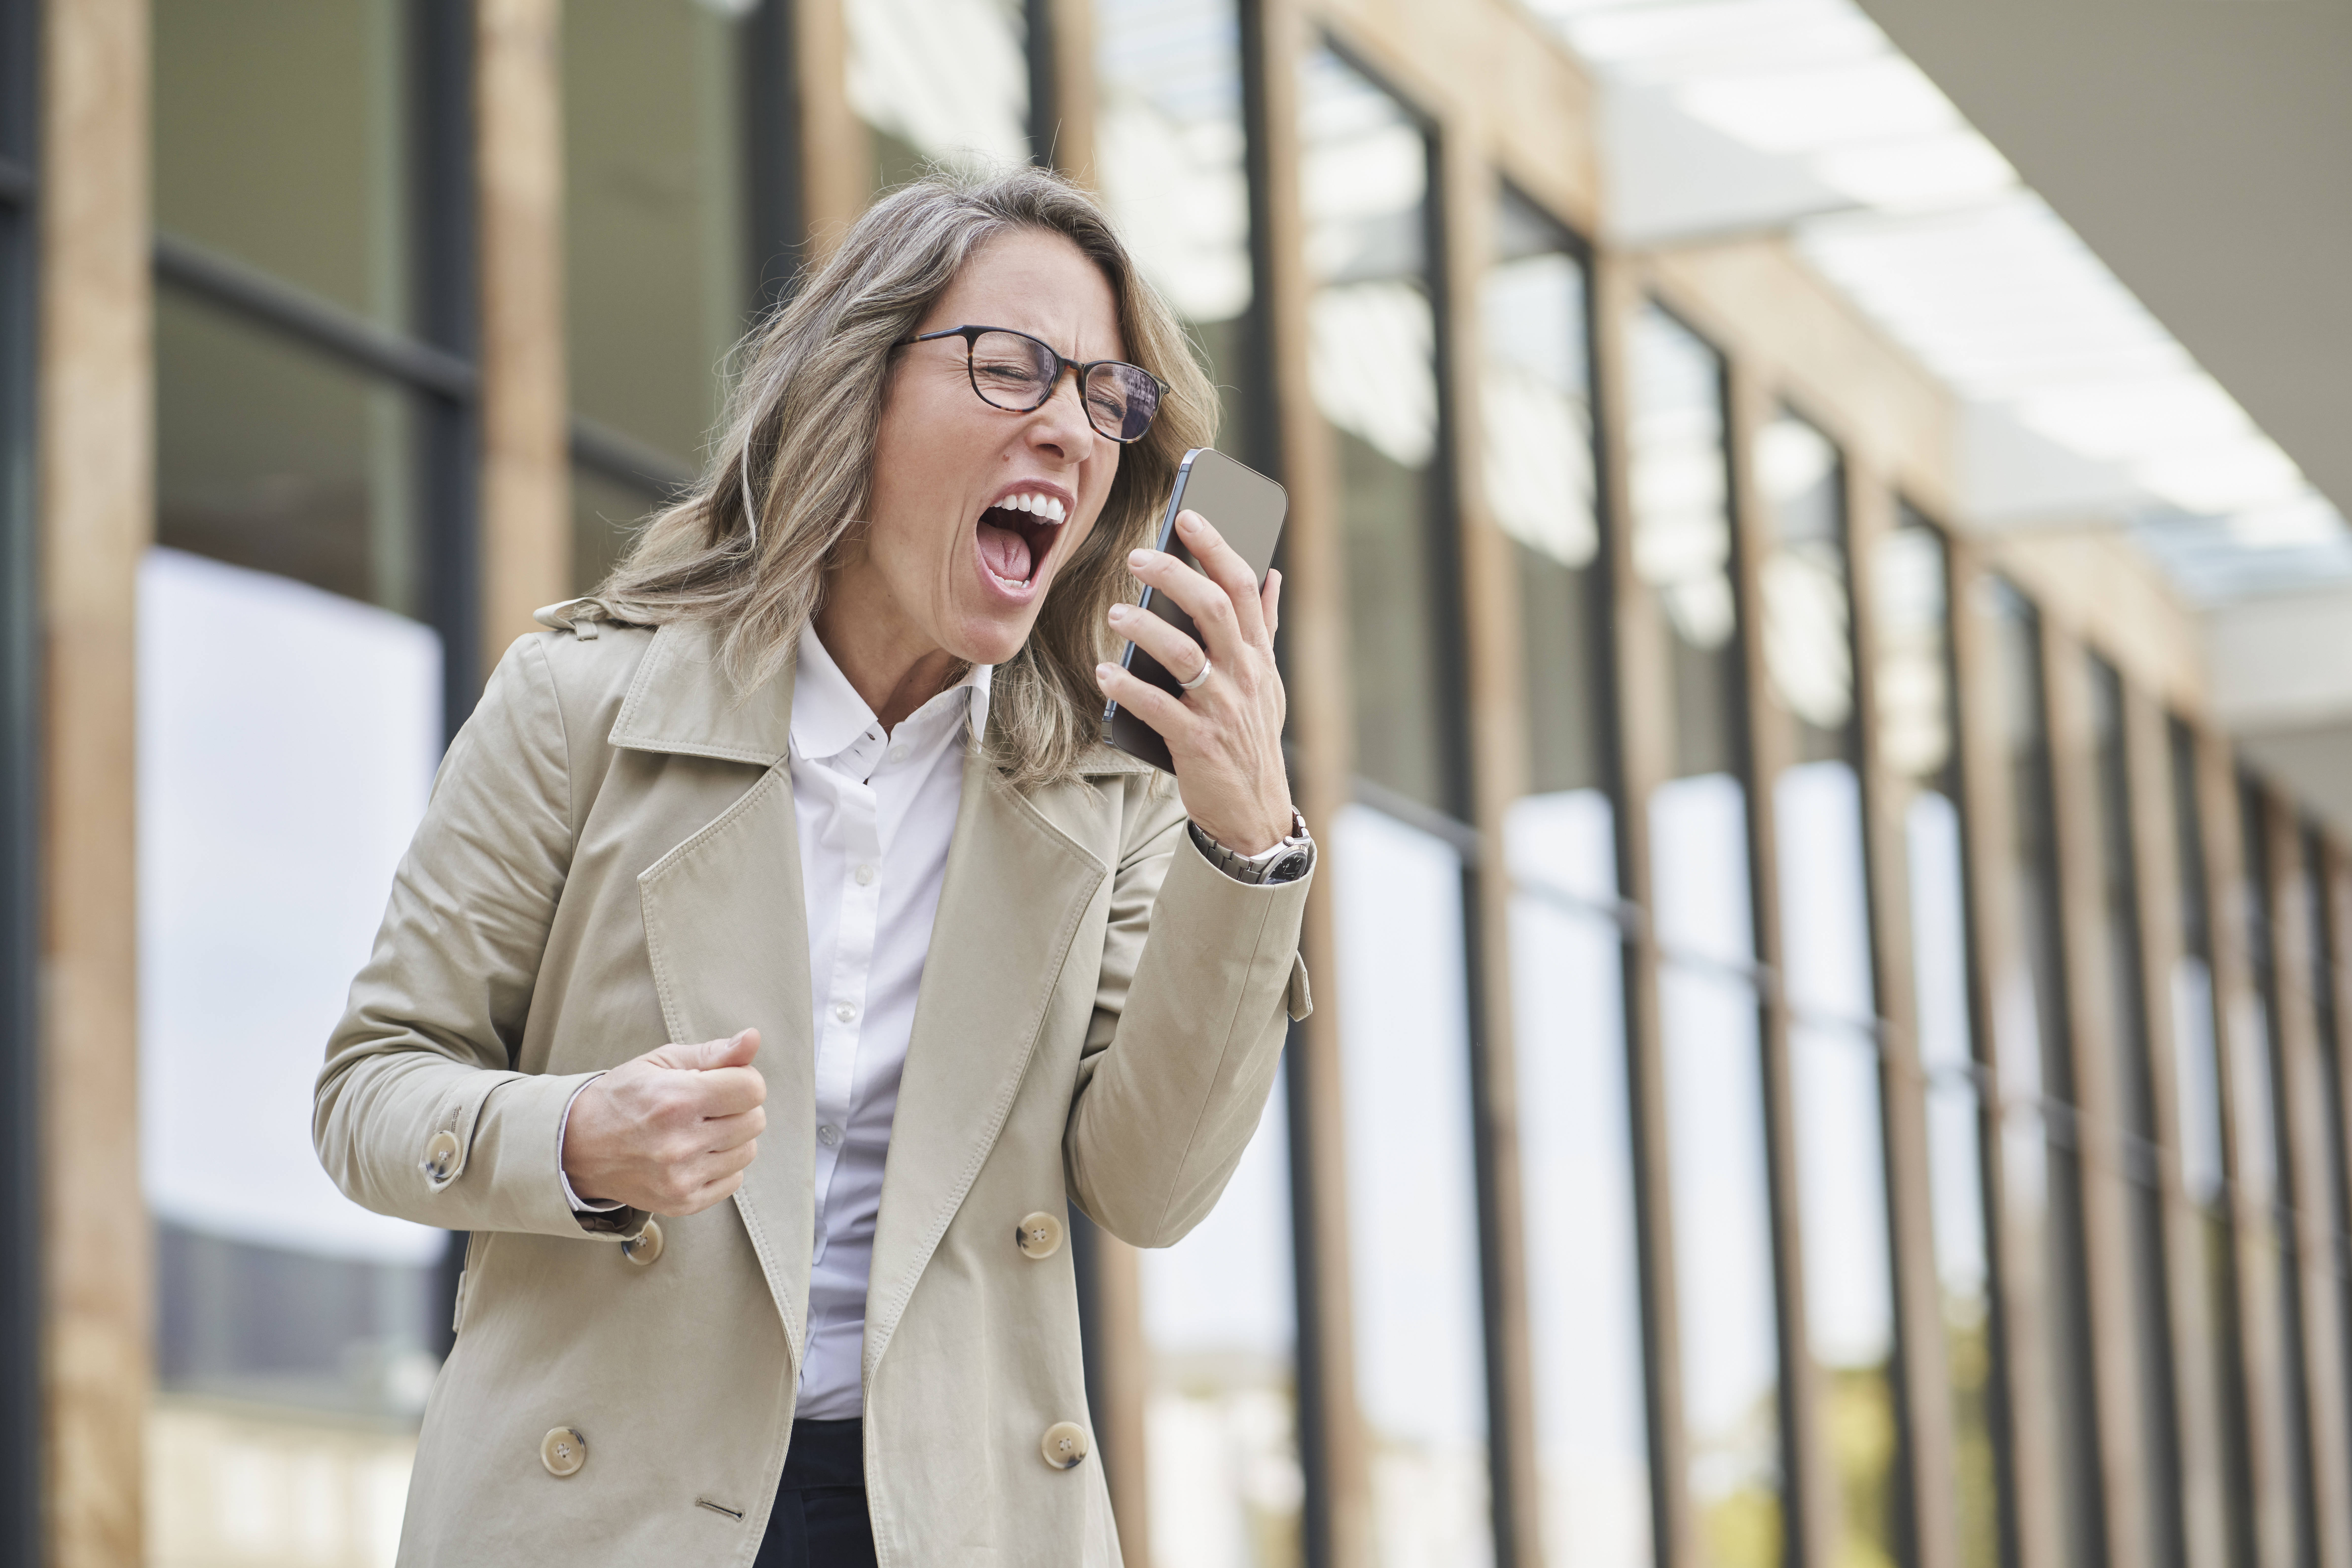 Mature businesswoman shouting on speaker phone outside building model released, Symbolfoto, RORF03320